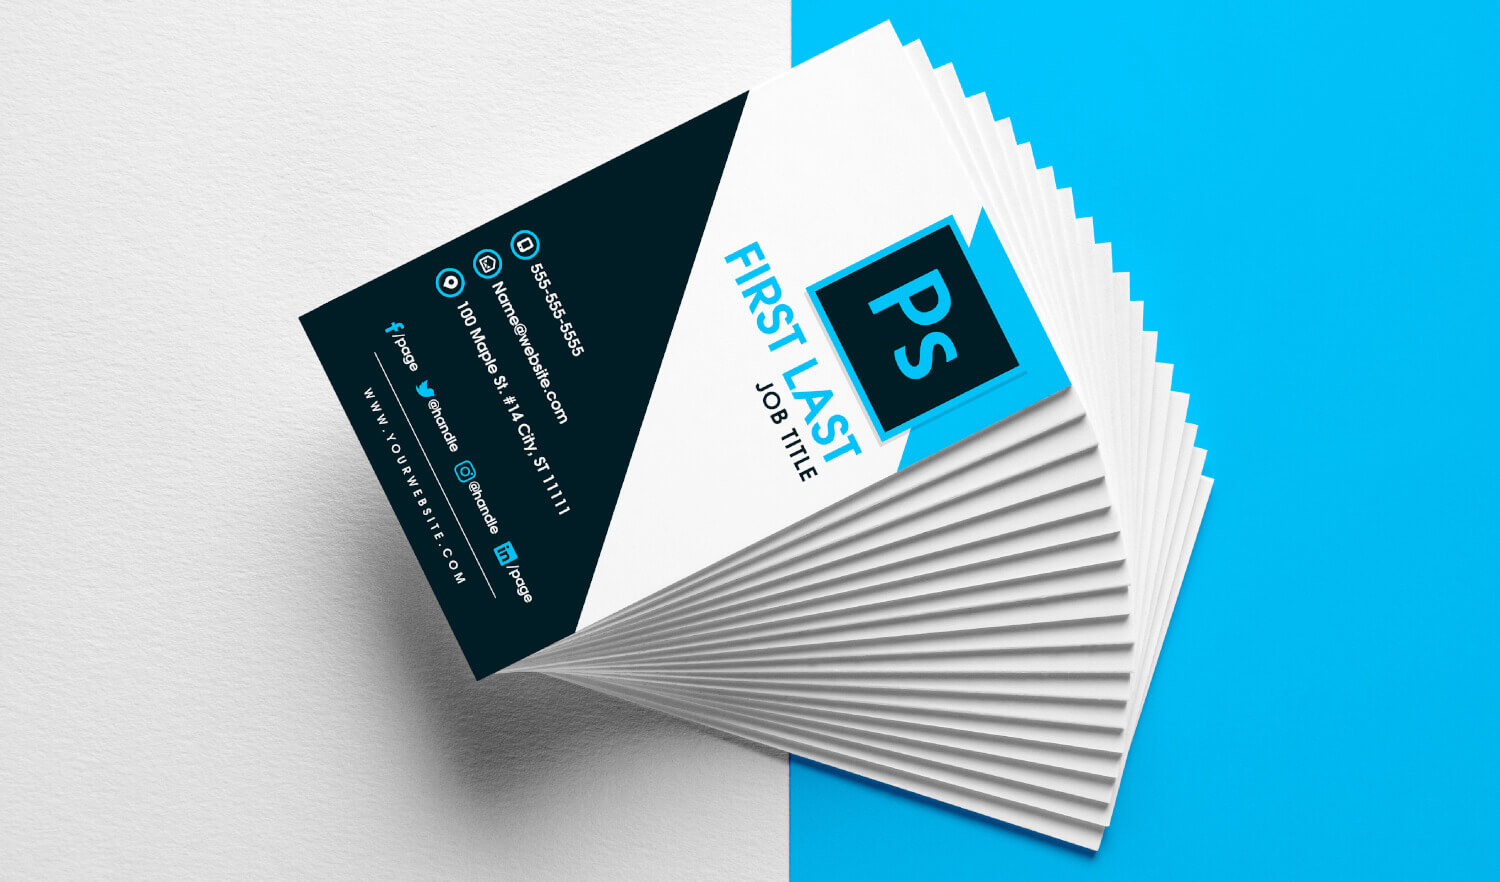 Free Vertical Business Card Template In Psd Format Throughout Free Business Card Templates In Psd Format